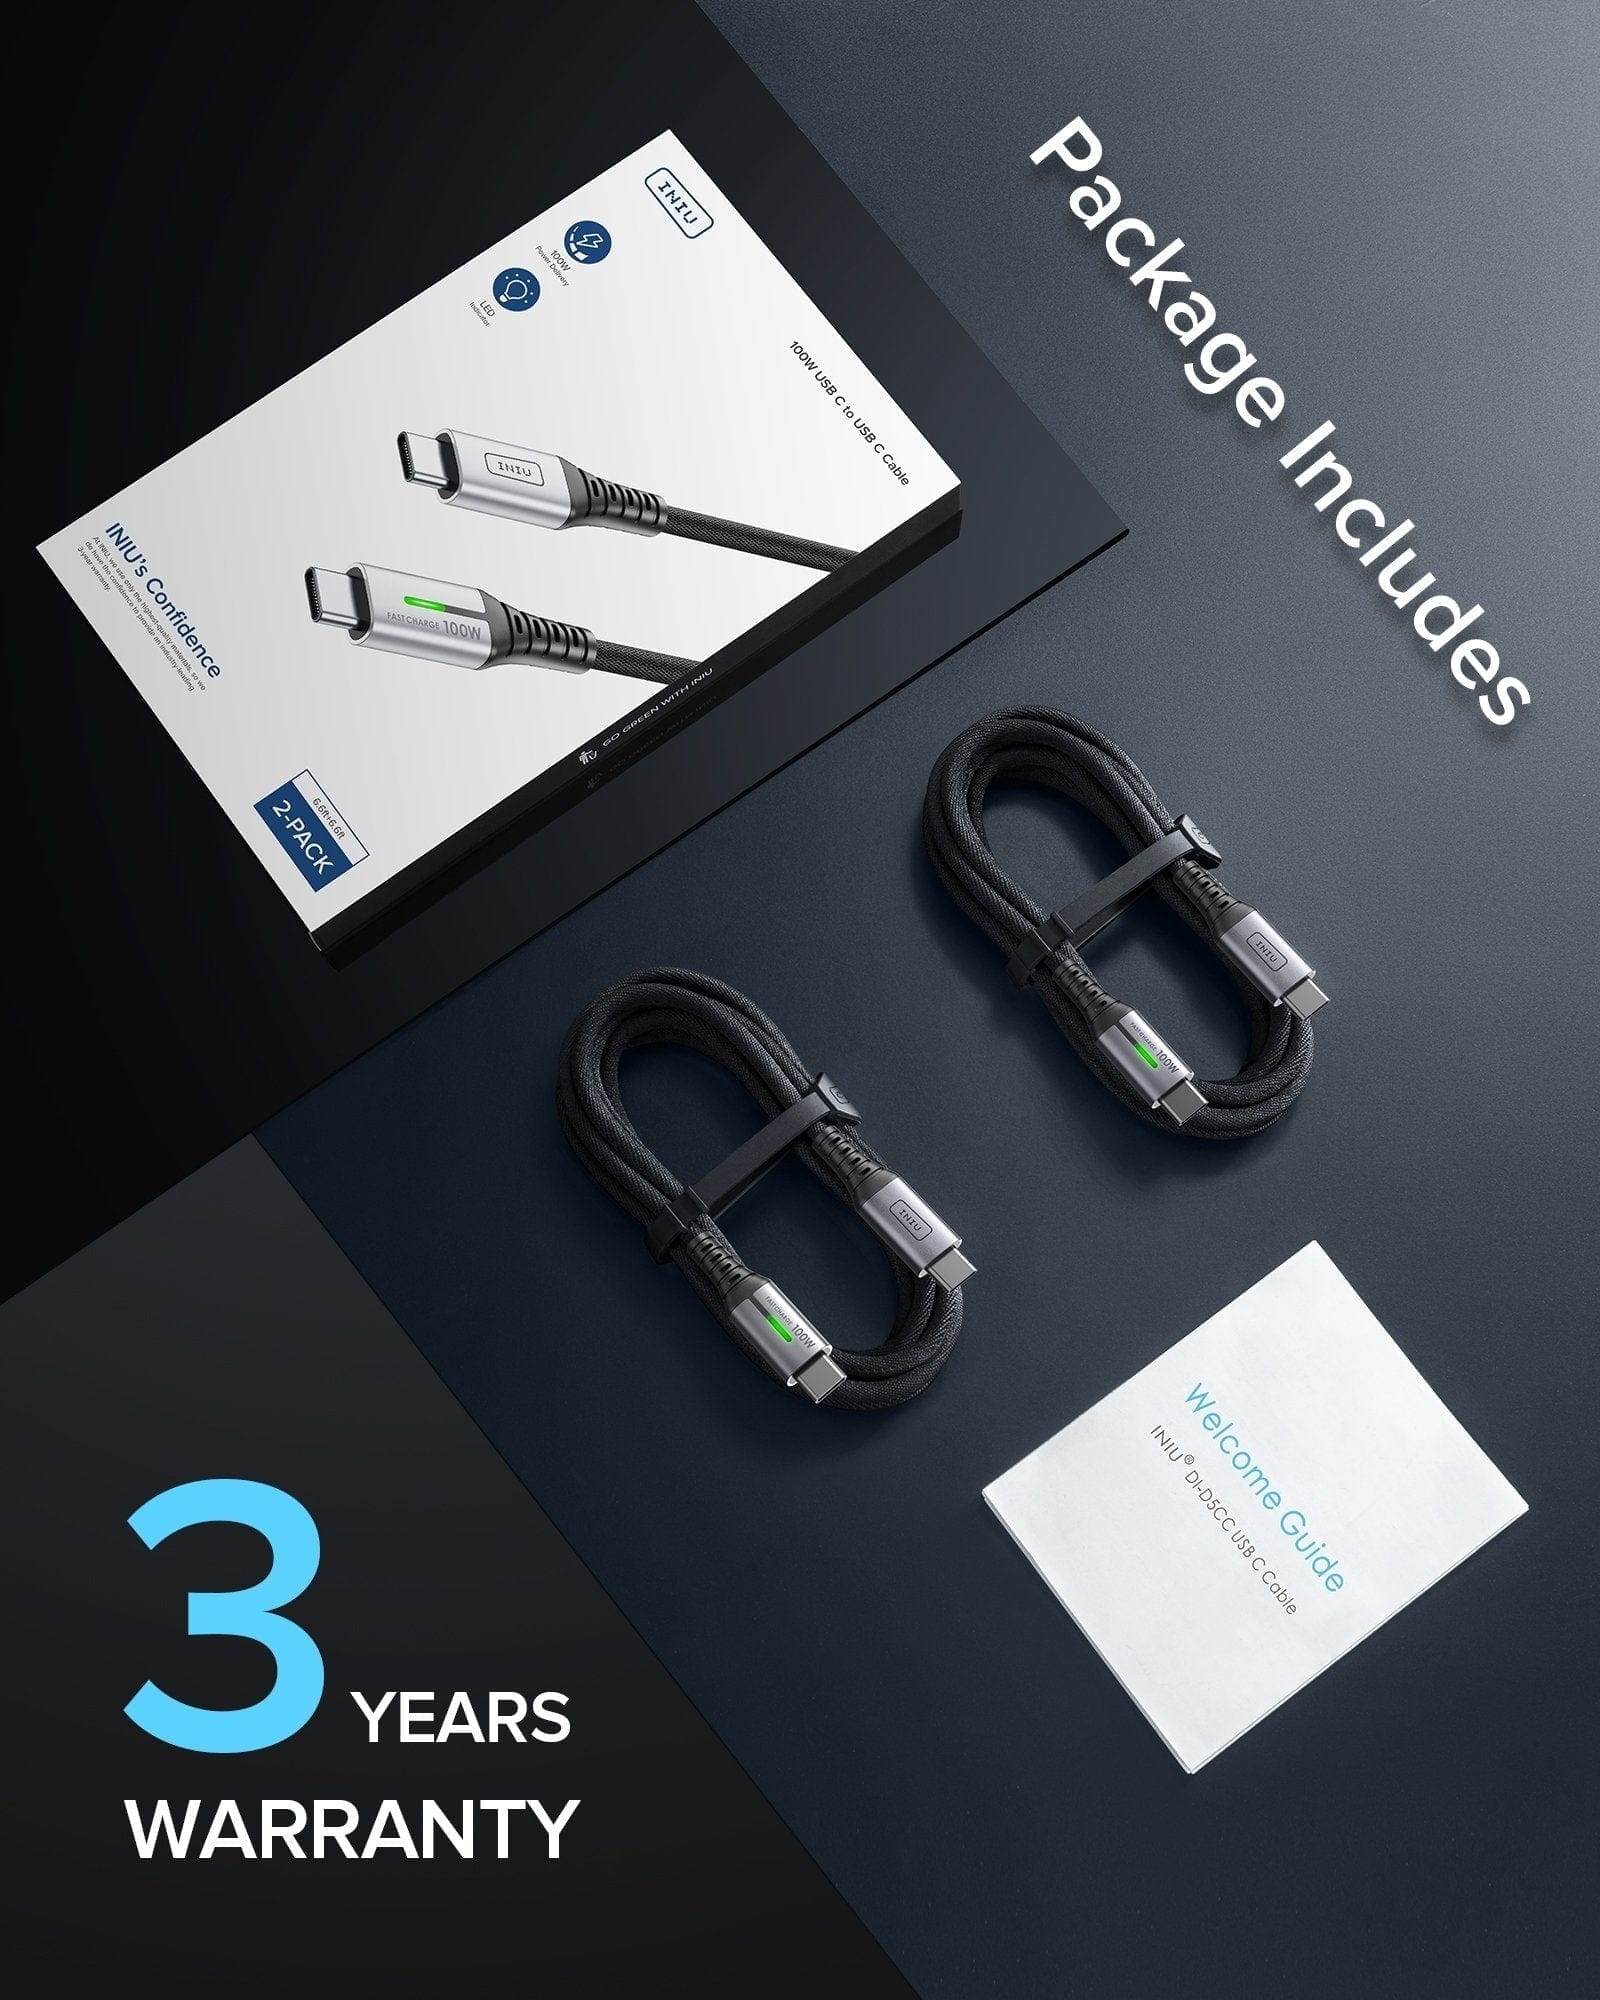 Package Includes: 100W USB C to USB C Cable 6.6ft *2, Welcome Guide, 3 Years Warranty